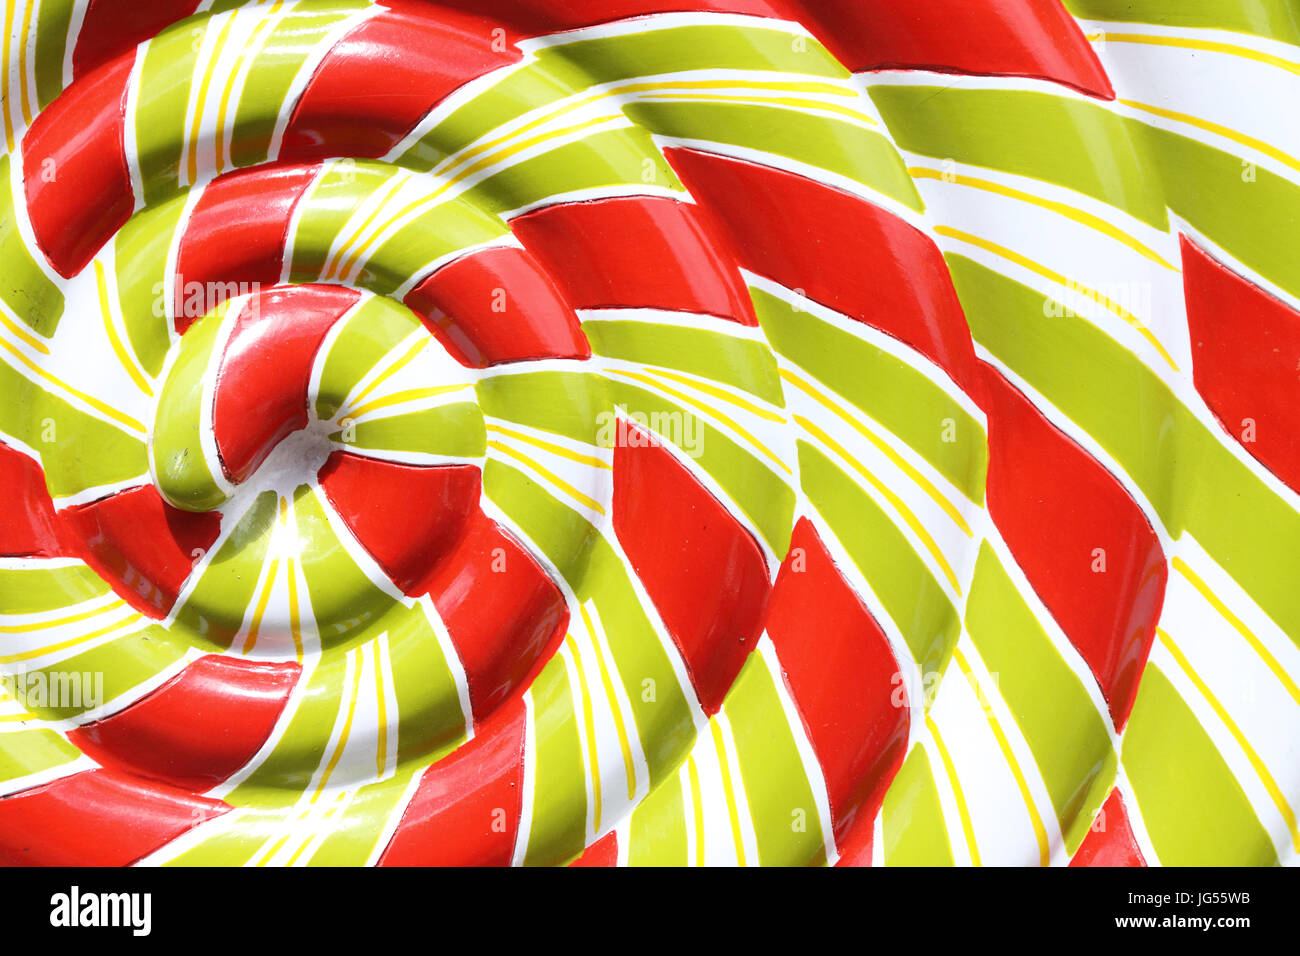 Close-up of large plastic model of a lollipop Stock Photo